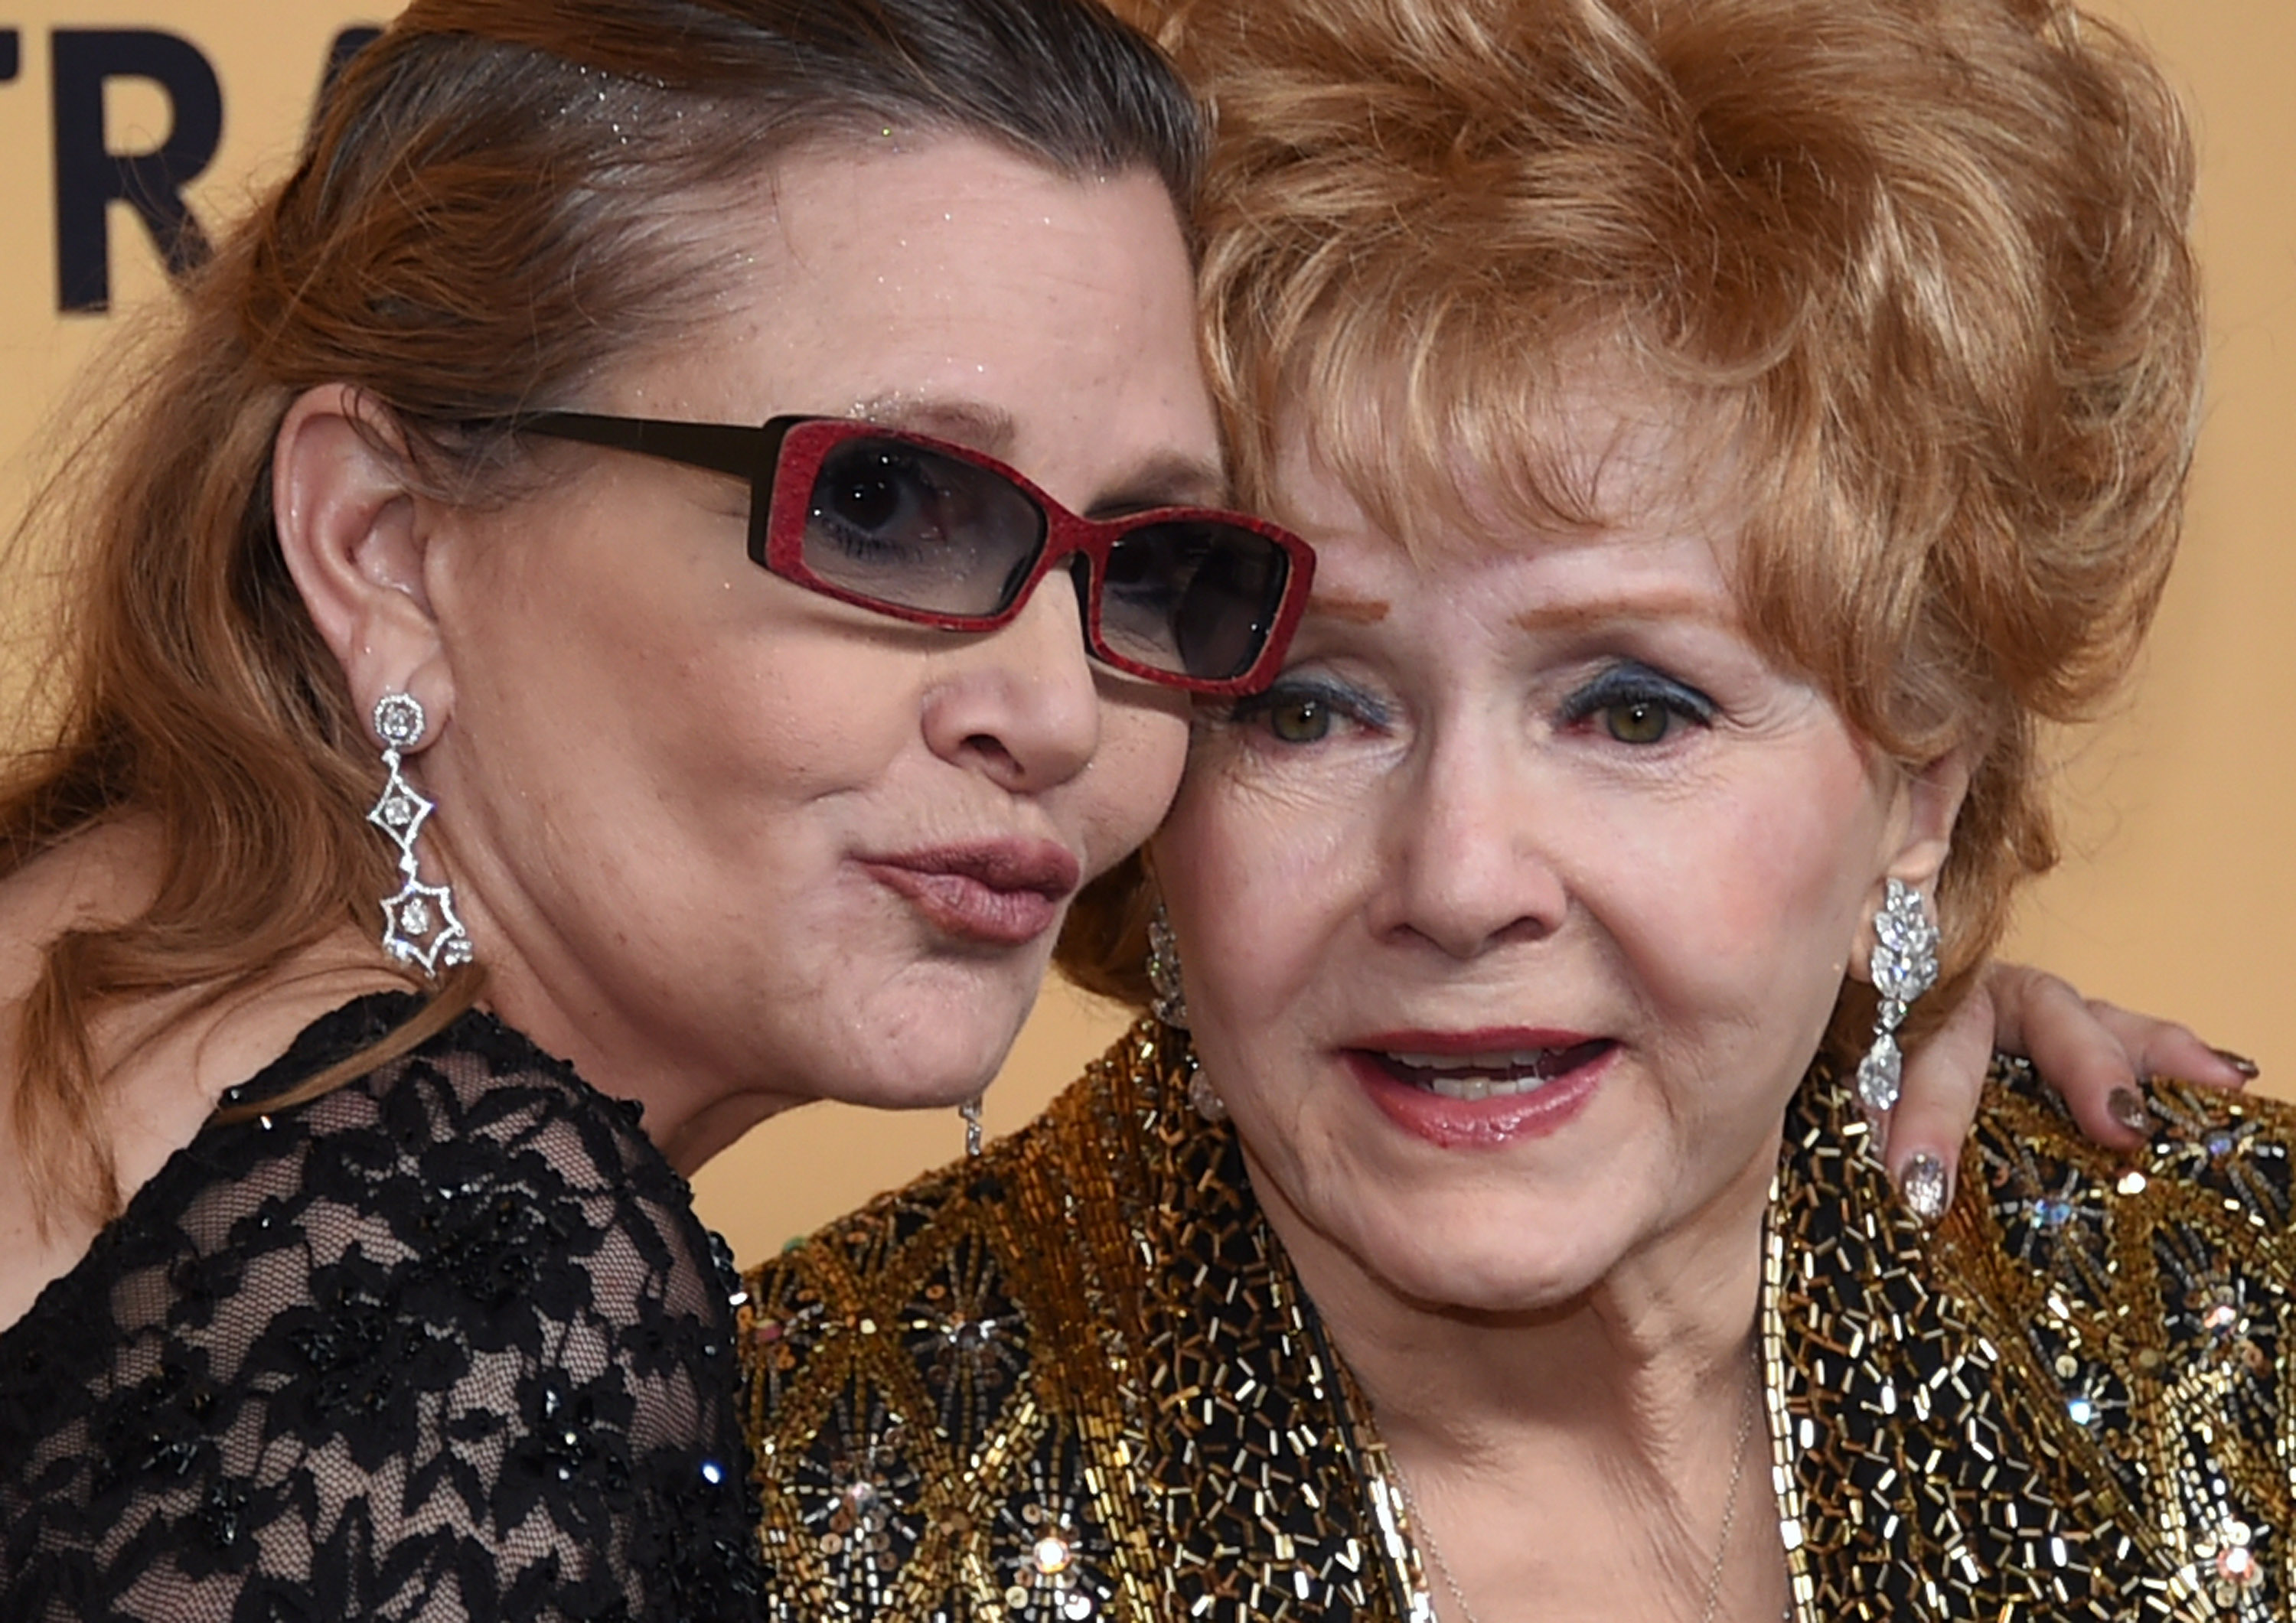 (FILES) This file photo taken on January 24, 2015 shows Debbie Reynolds (R), recipient of the Screen Actors Guild Life Achievement Award, and her daughter Carrie Fisher posing in the press room during the 21st Annual Screen Actors Guild Awards at The Shrine Auditorium  in Los Angeles, California.    Film legend Debbie Reynolds died on December 28, 2016 after suffering a stroke, a day after the death of her movie star daughter Carrie Fisher, US media reported. / AFP PHOTO / GETTY IMAGES NORTH AMERICA / Ethan Miller